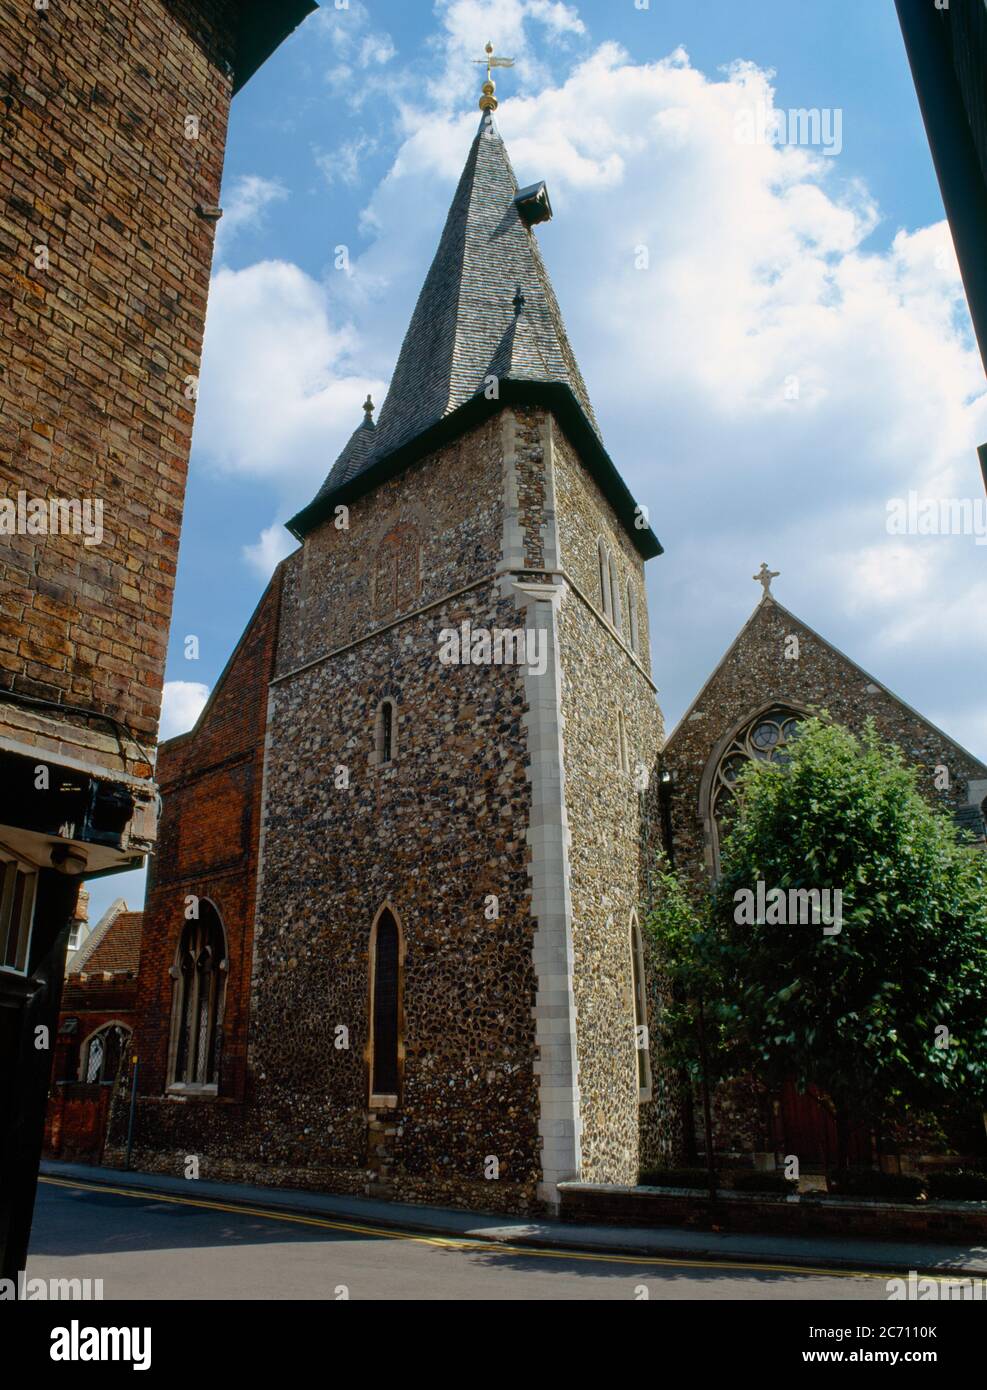 View E of the early C13th W tower of All Saints Church, Maldon Essex, England, UK; considered to be the only triangular church tower in England. Stock Photo